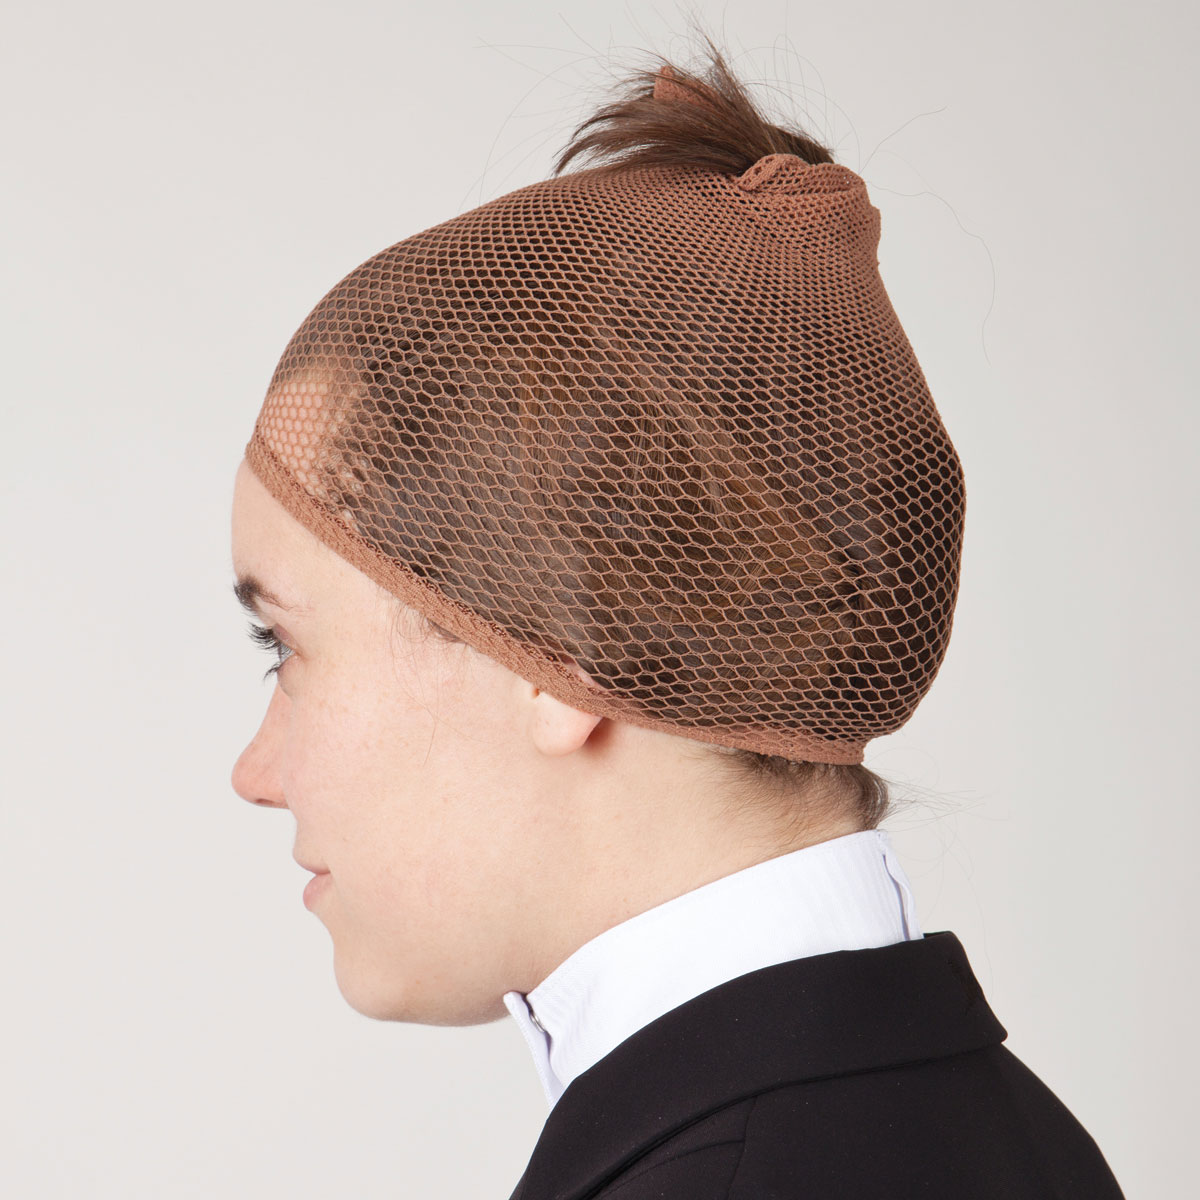 Blonde Brown Standard or Heavy Weight Competition Horse Riding Hair Net Black 